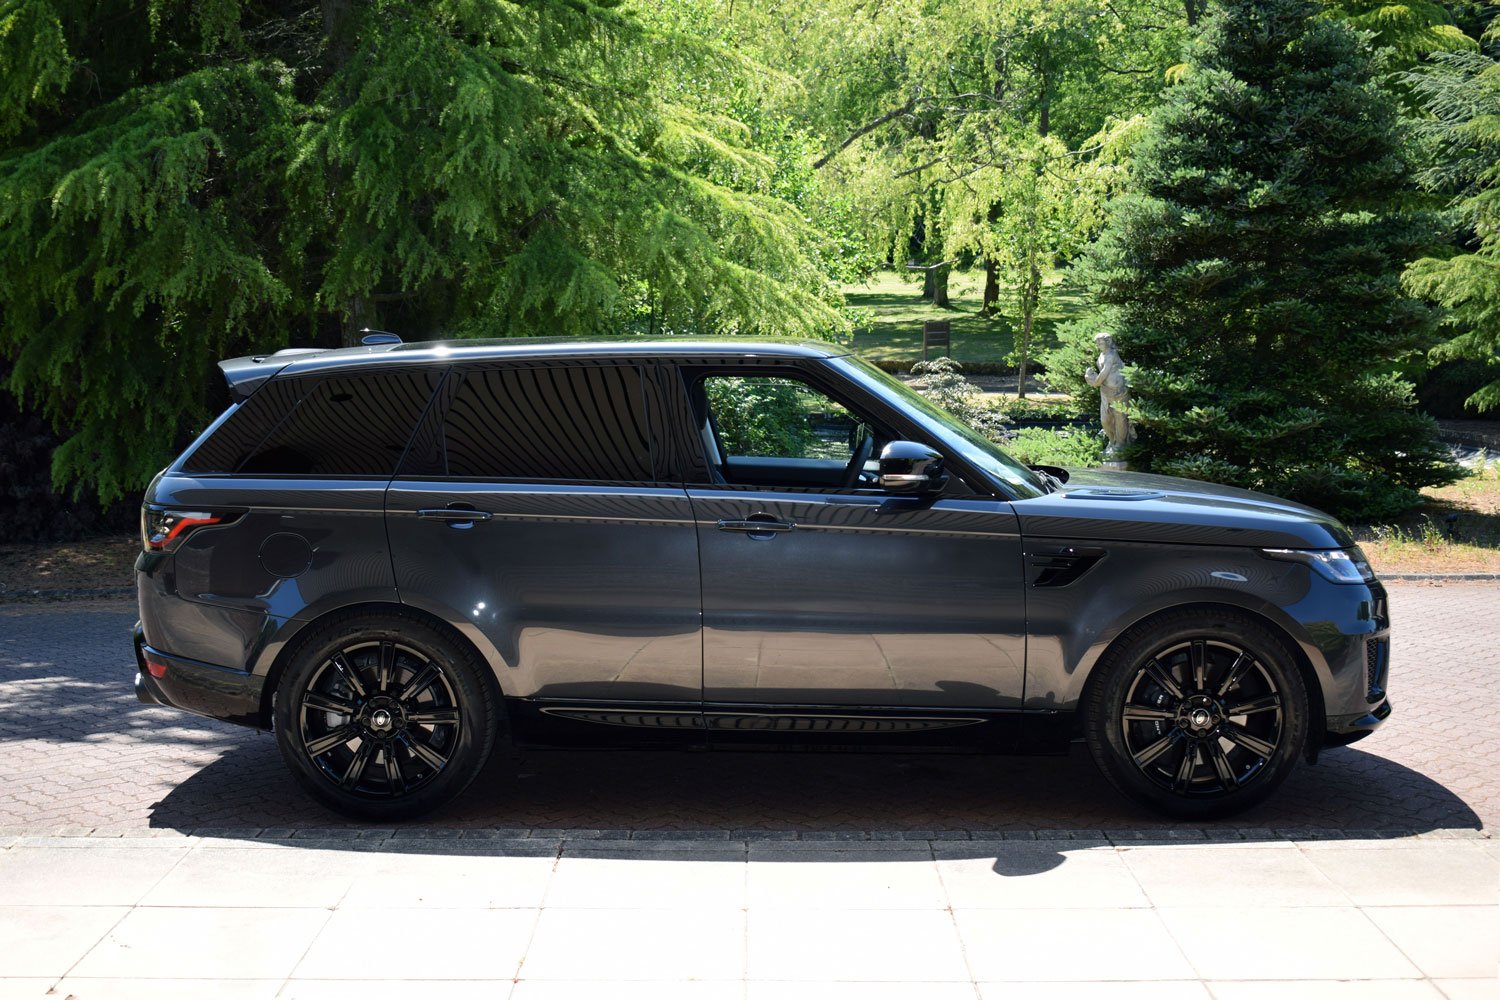 Range Rover Sport 3.0 V6 SuperCharged - Sport System with Sound Architect (2018-20) - 0